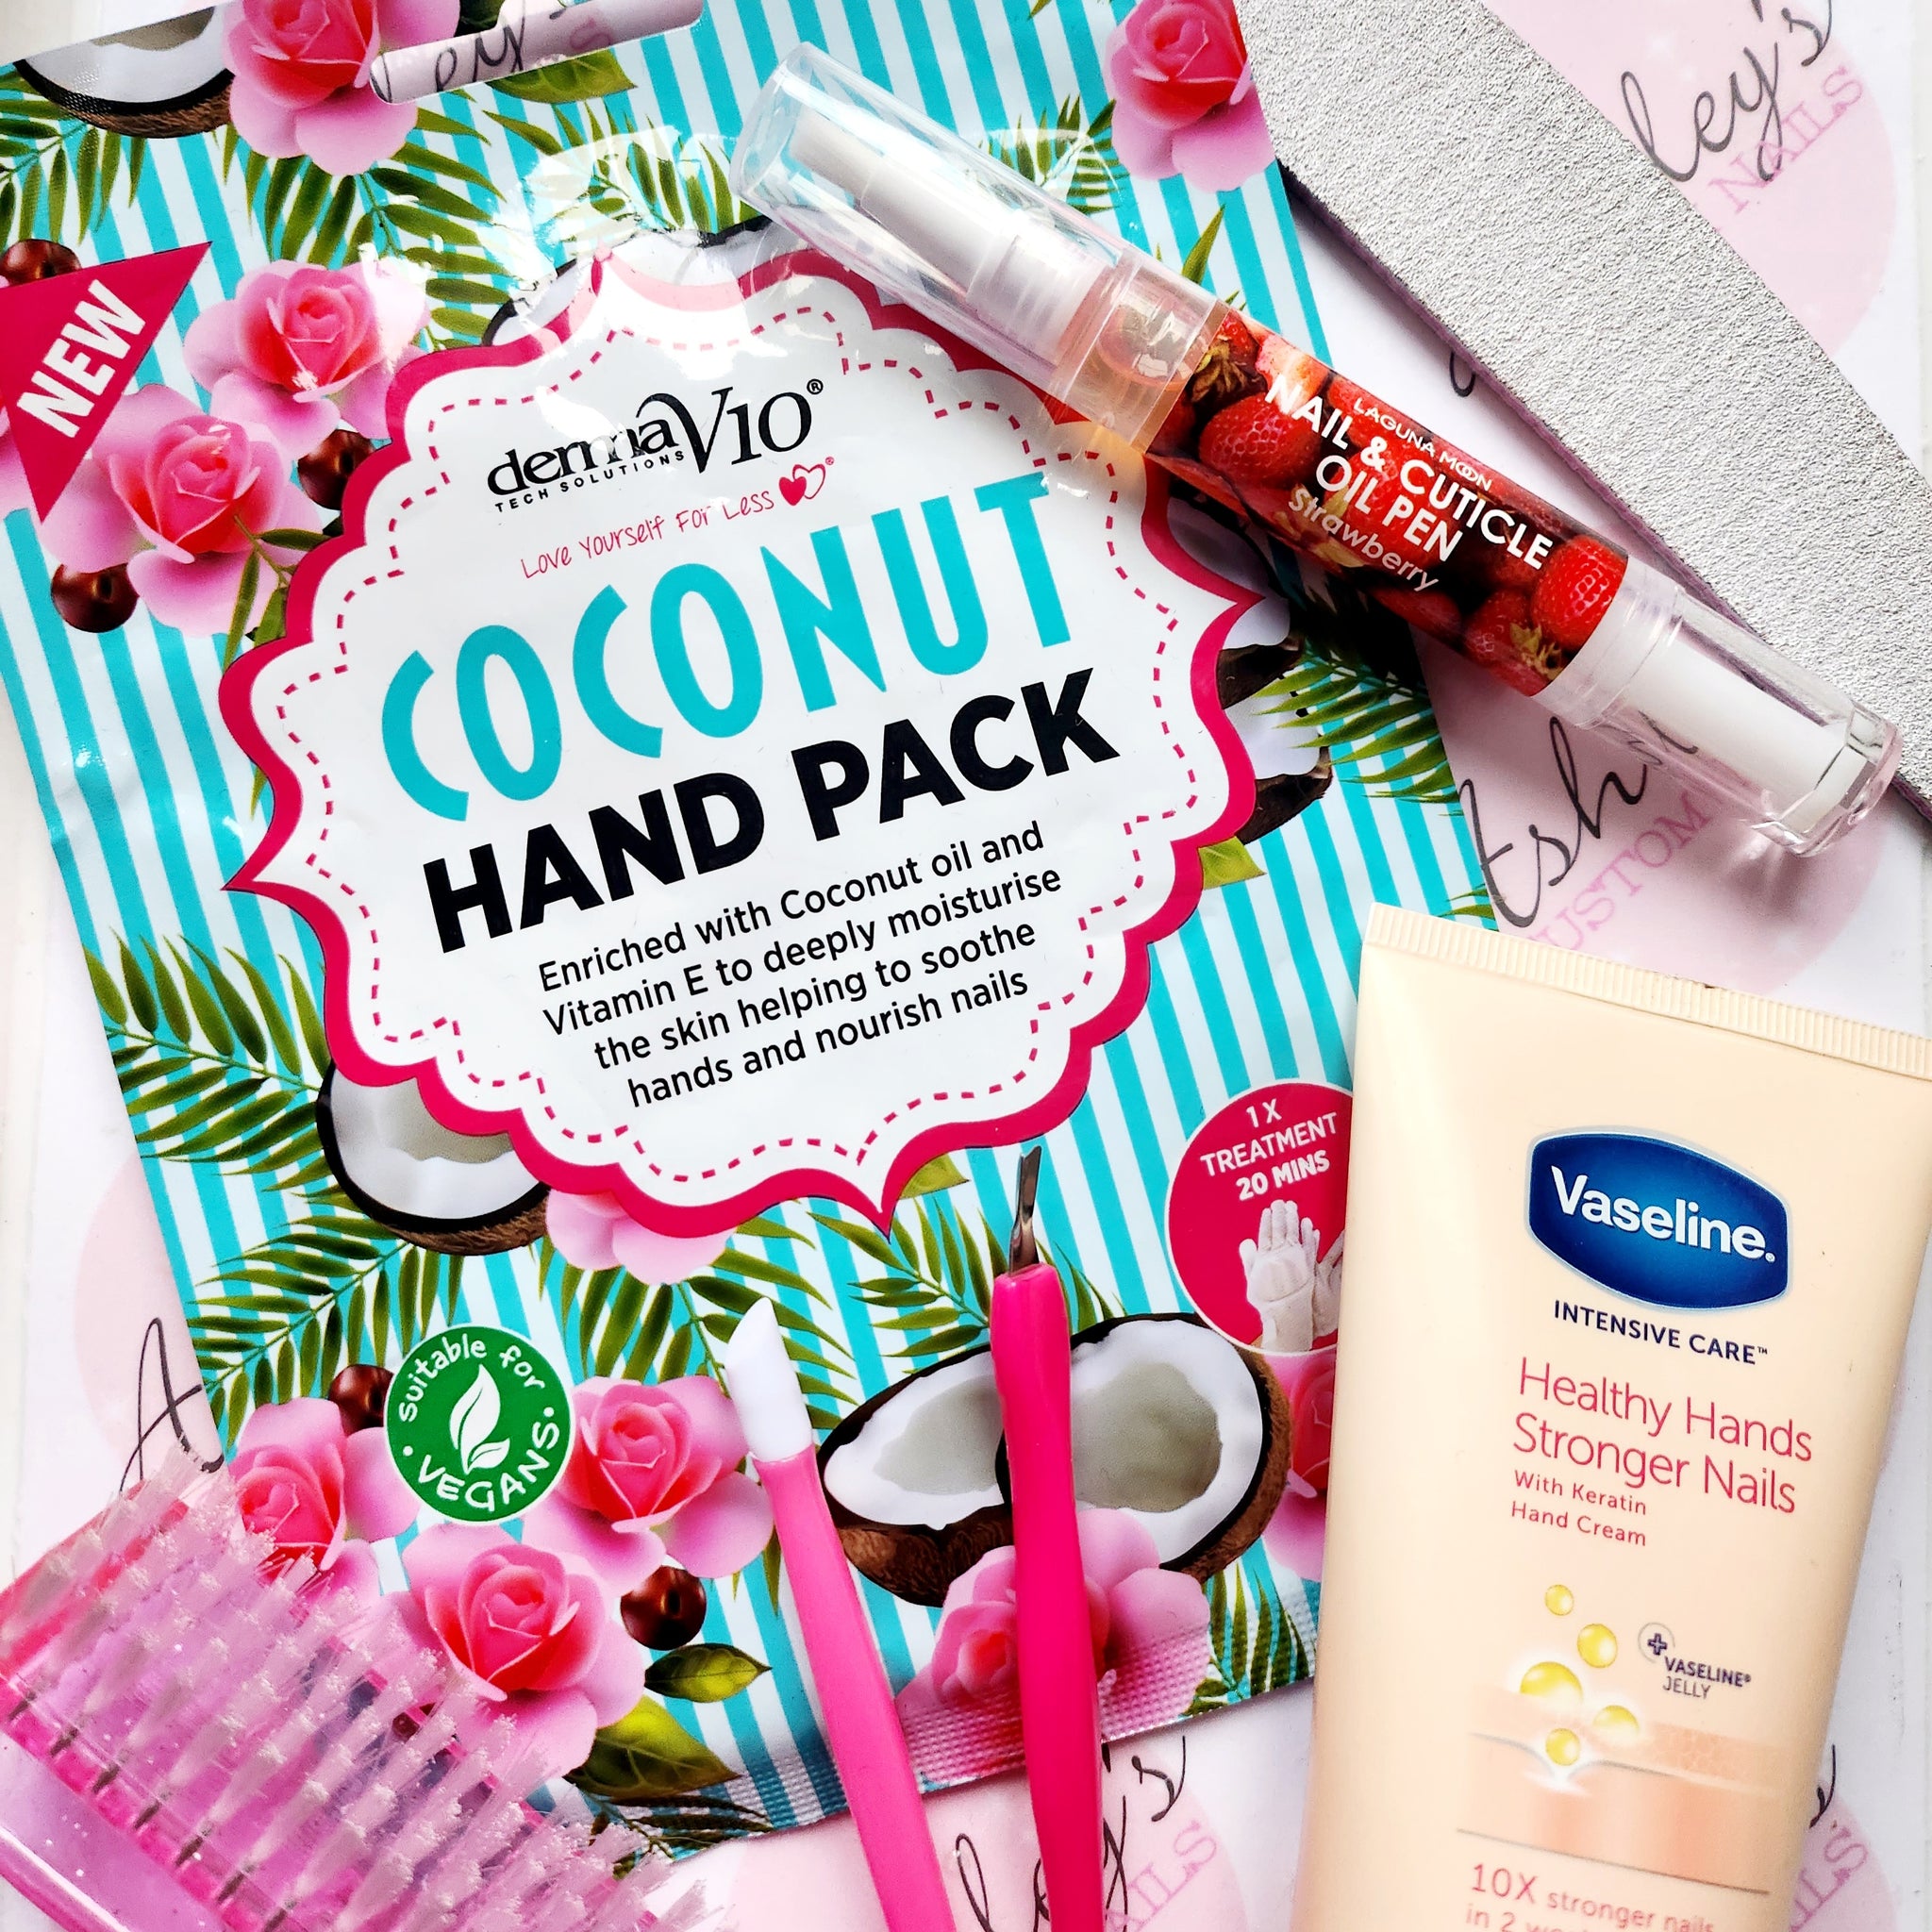 Hand & Nail care pack